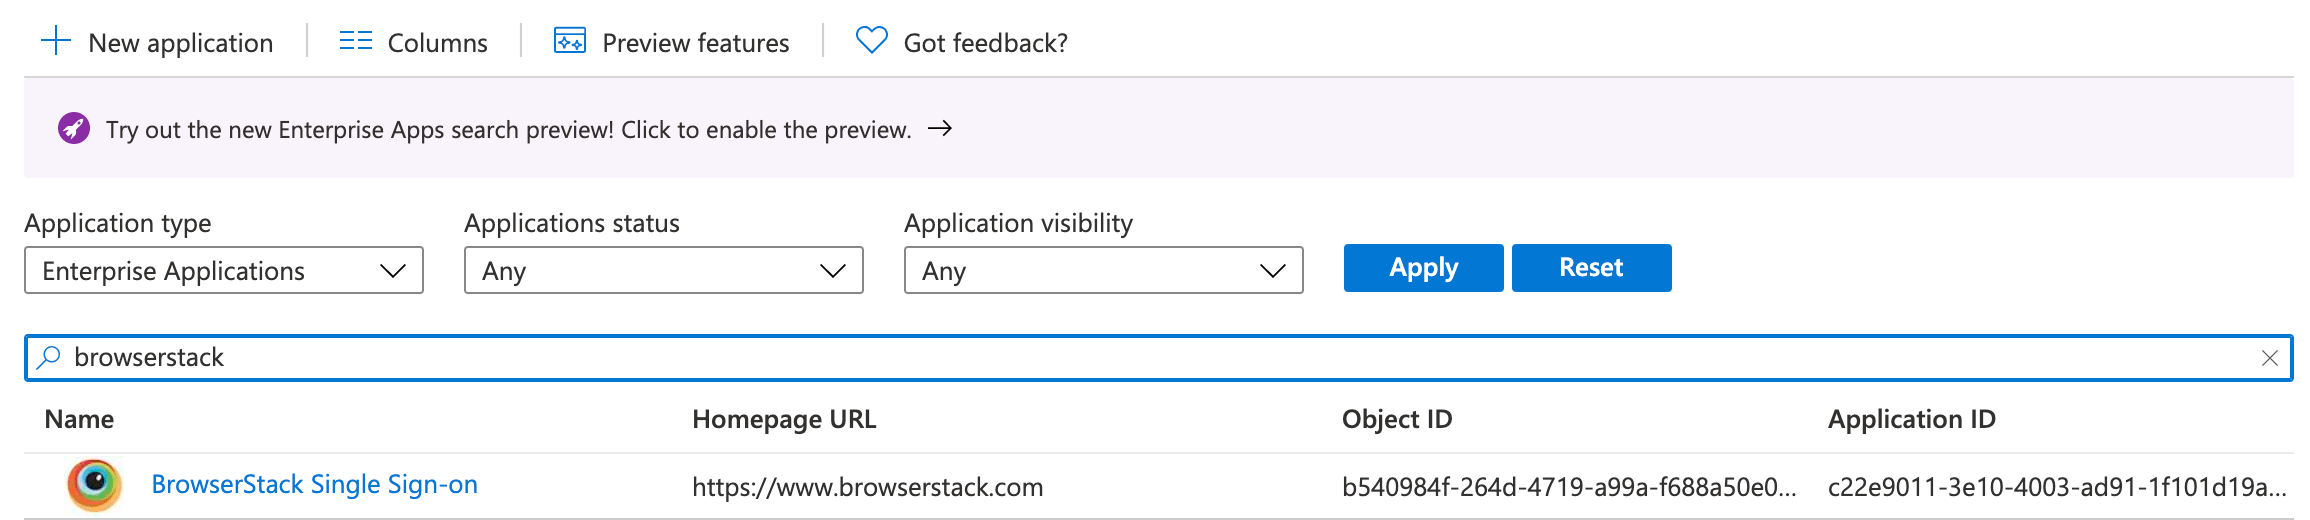 The BrowserStack Single Sign-on link in the Applications list